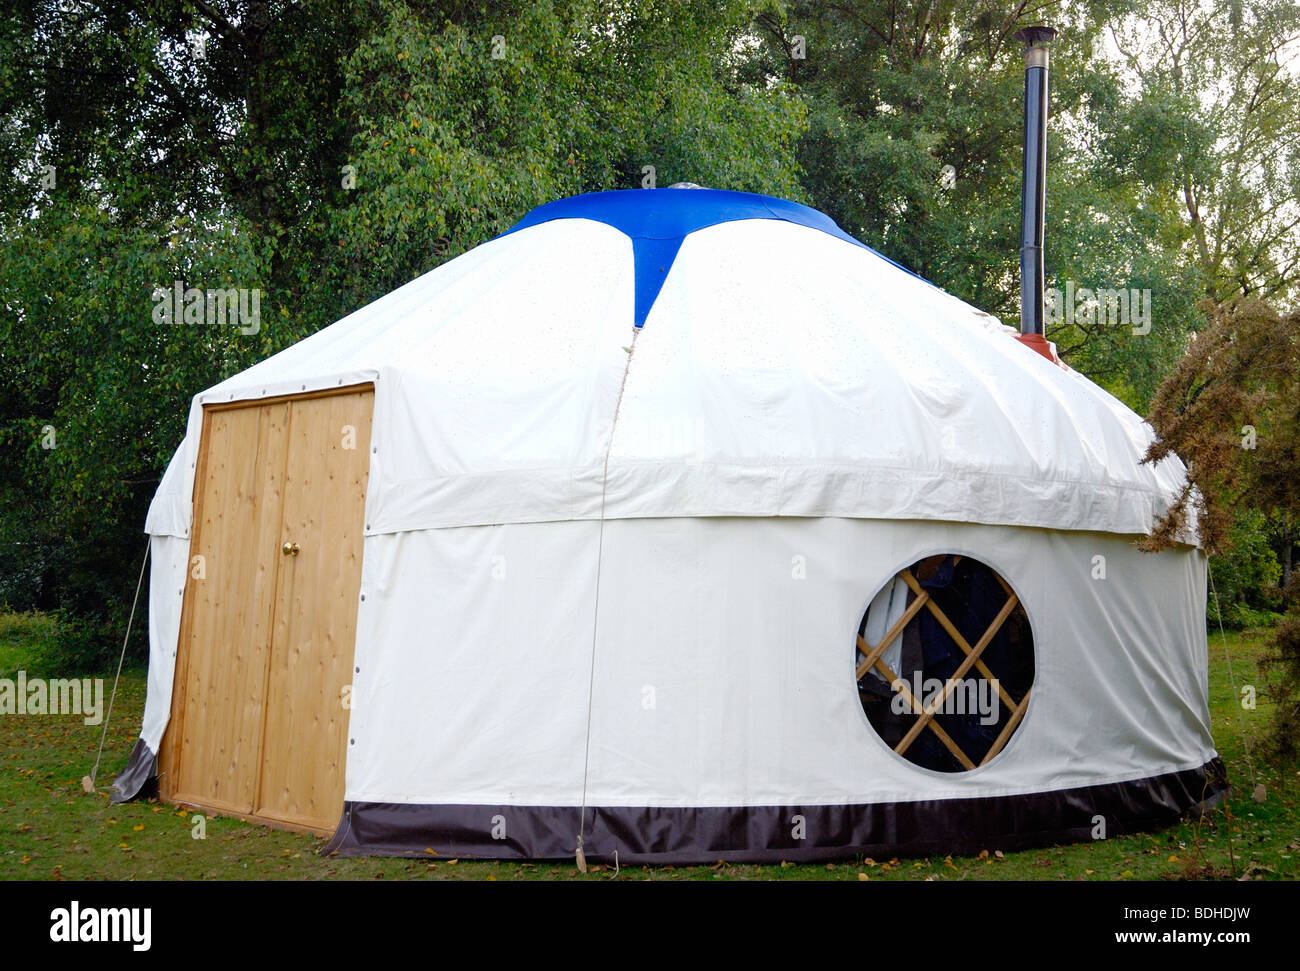 A Yurt tent in a wood Stock Photo